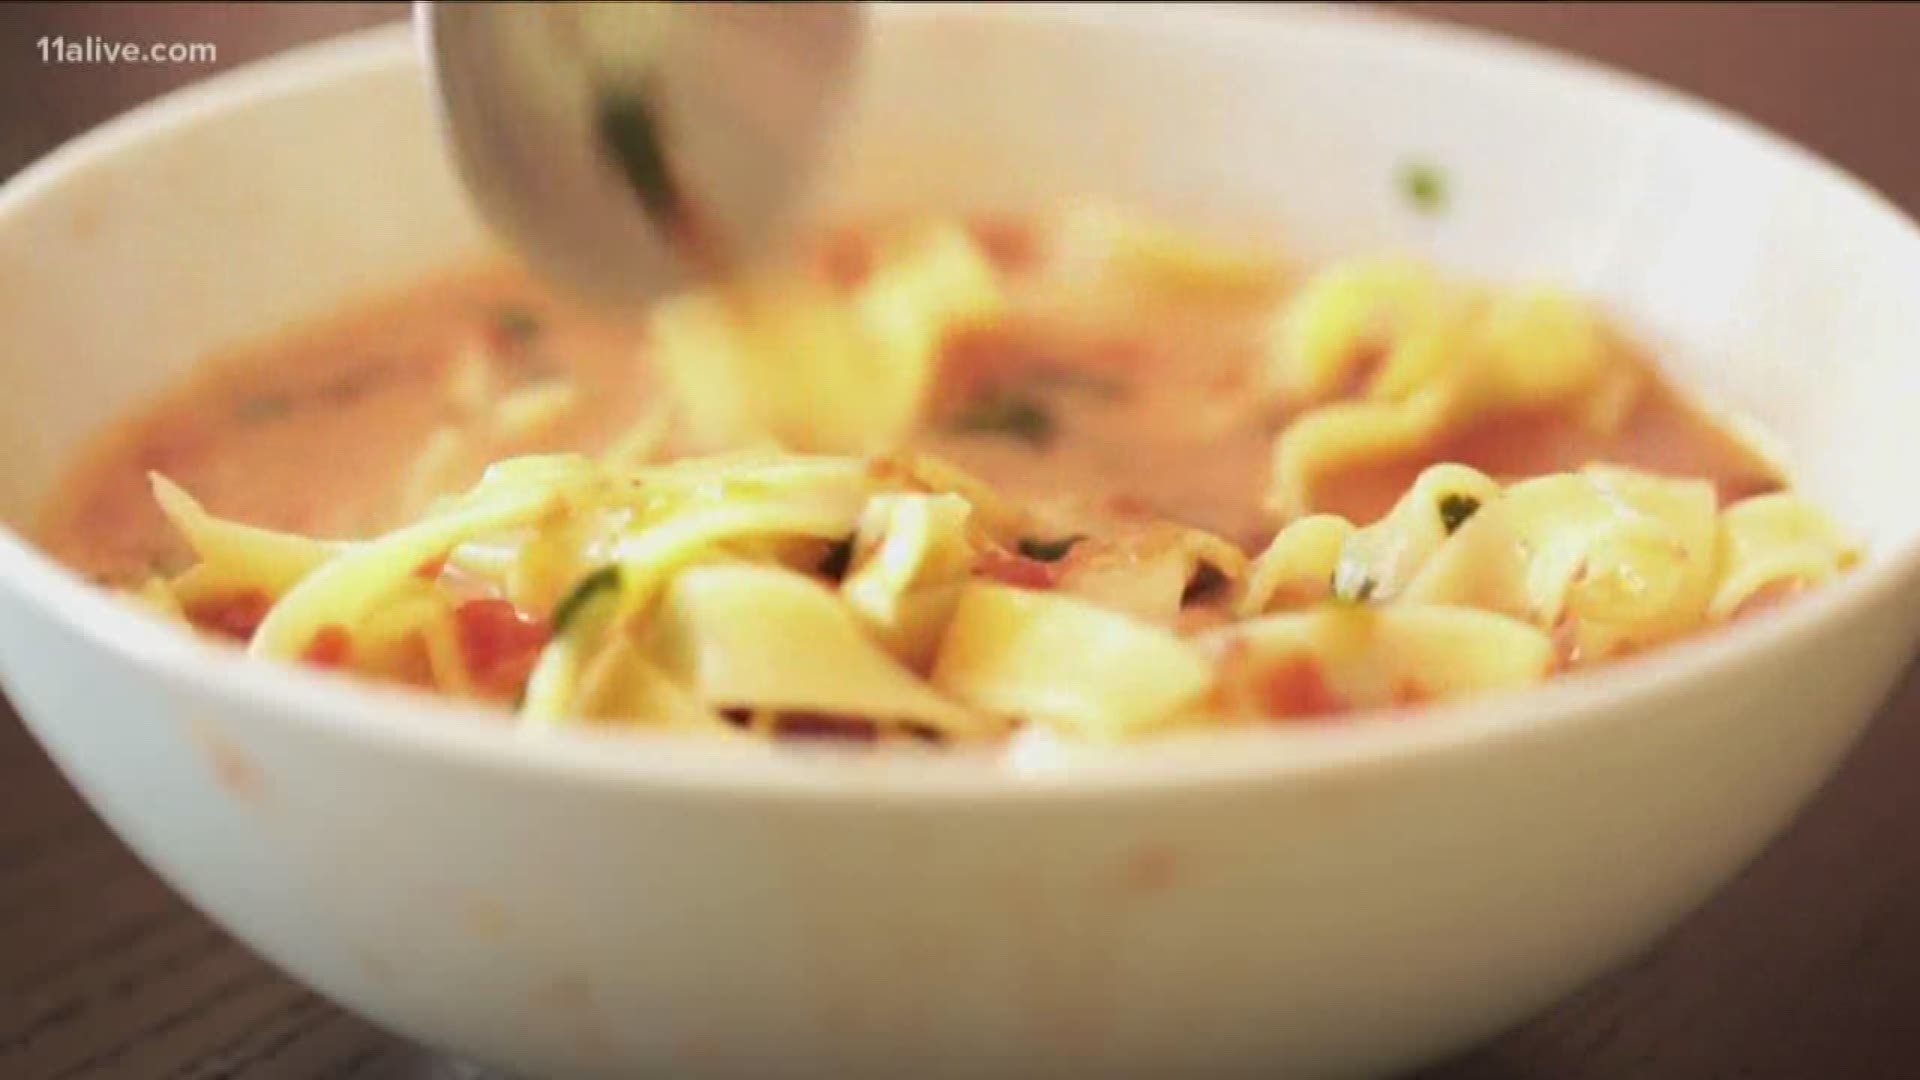 Nutritionists say chicken noodle soup has healing powers